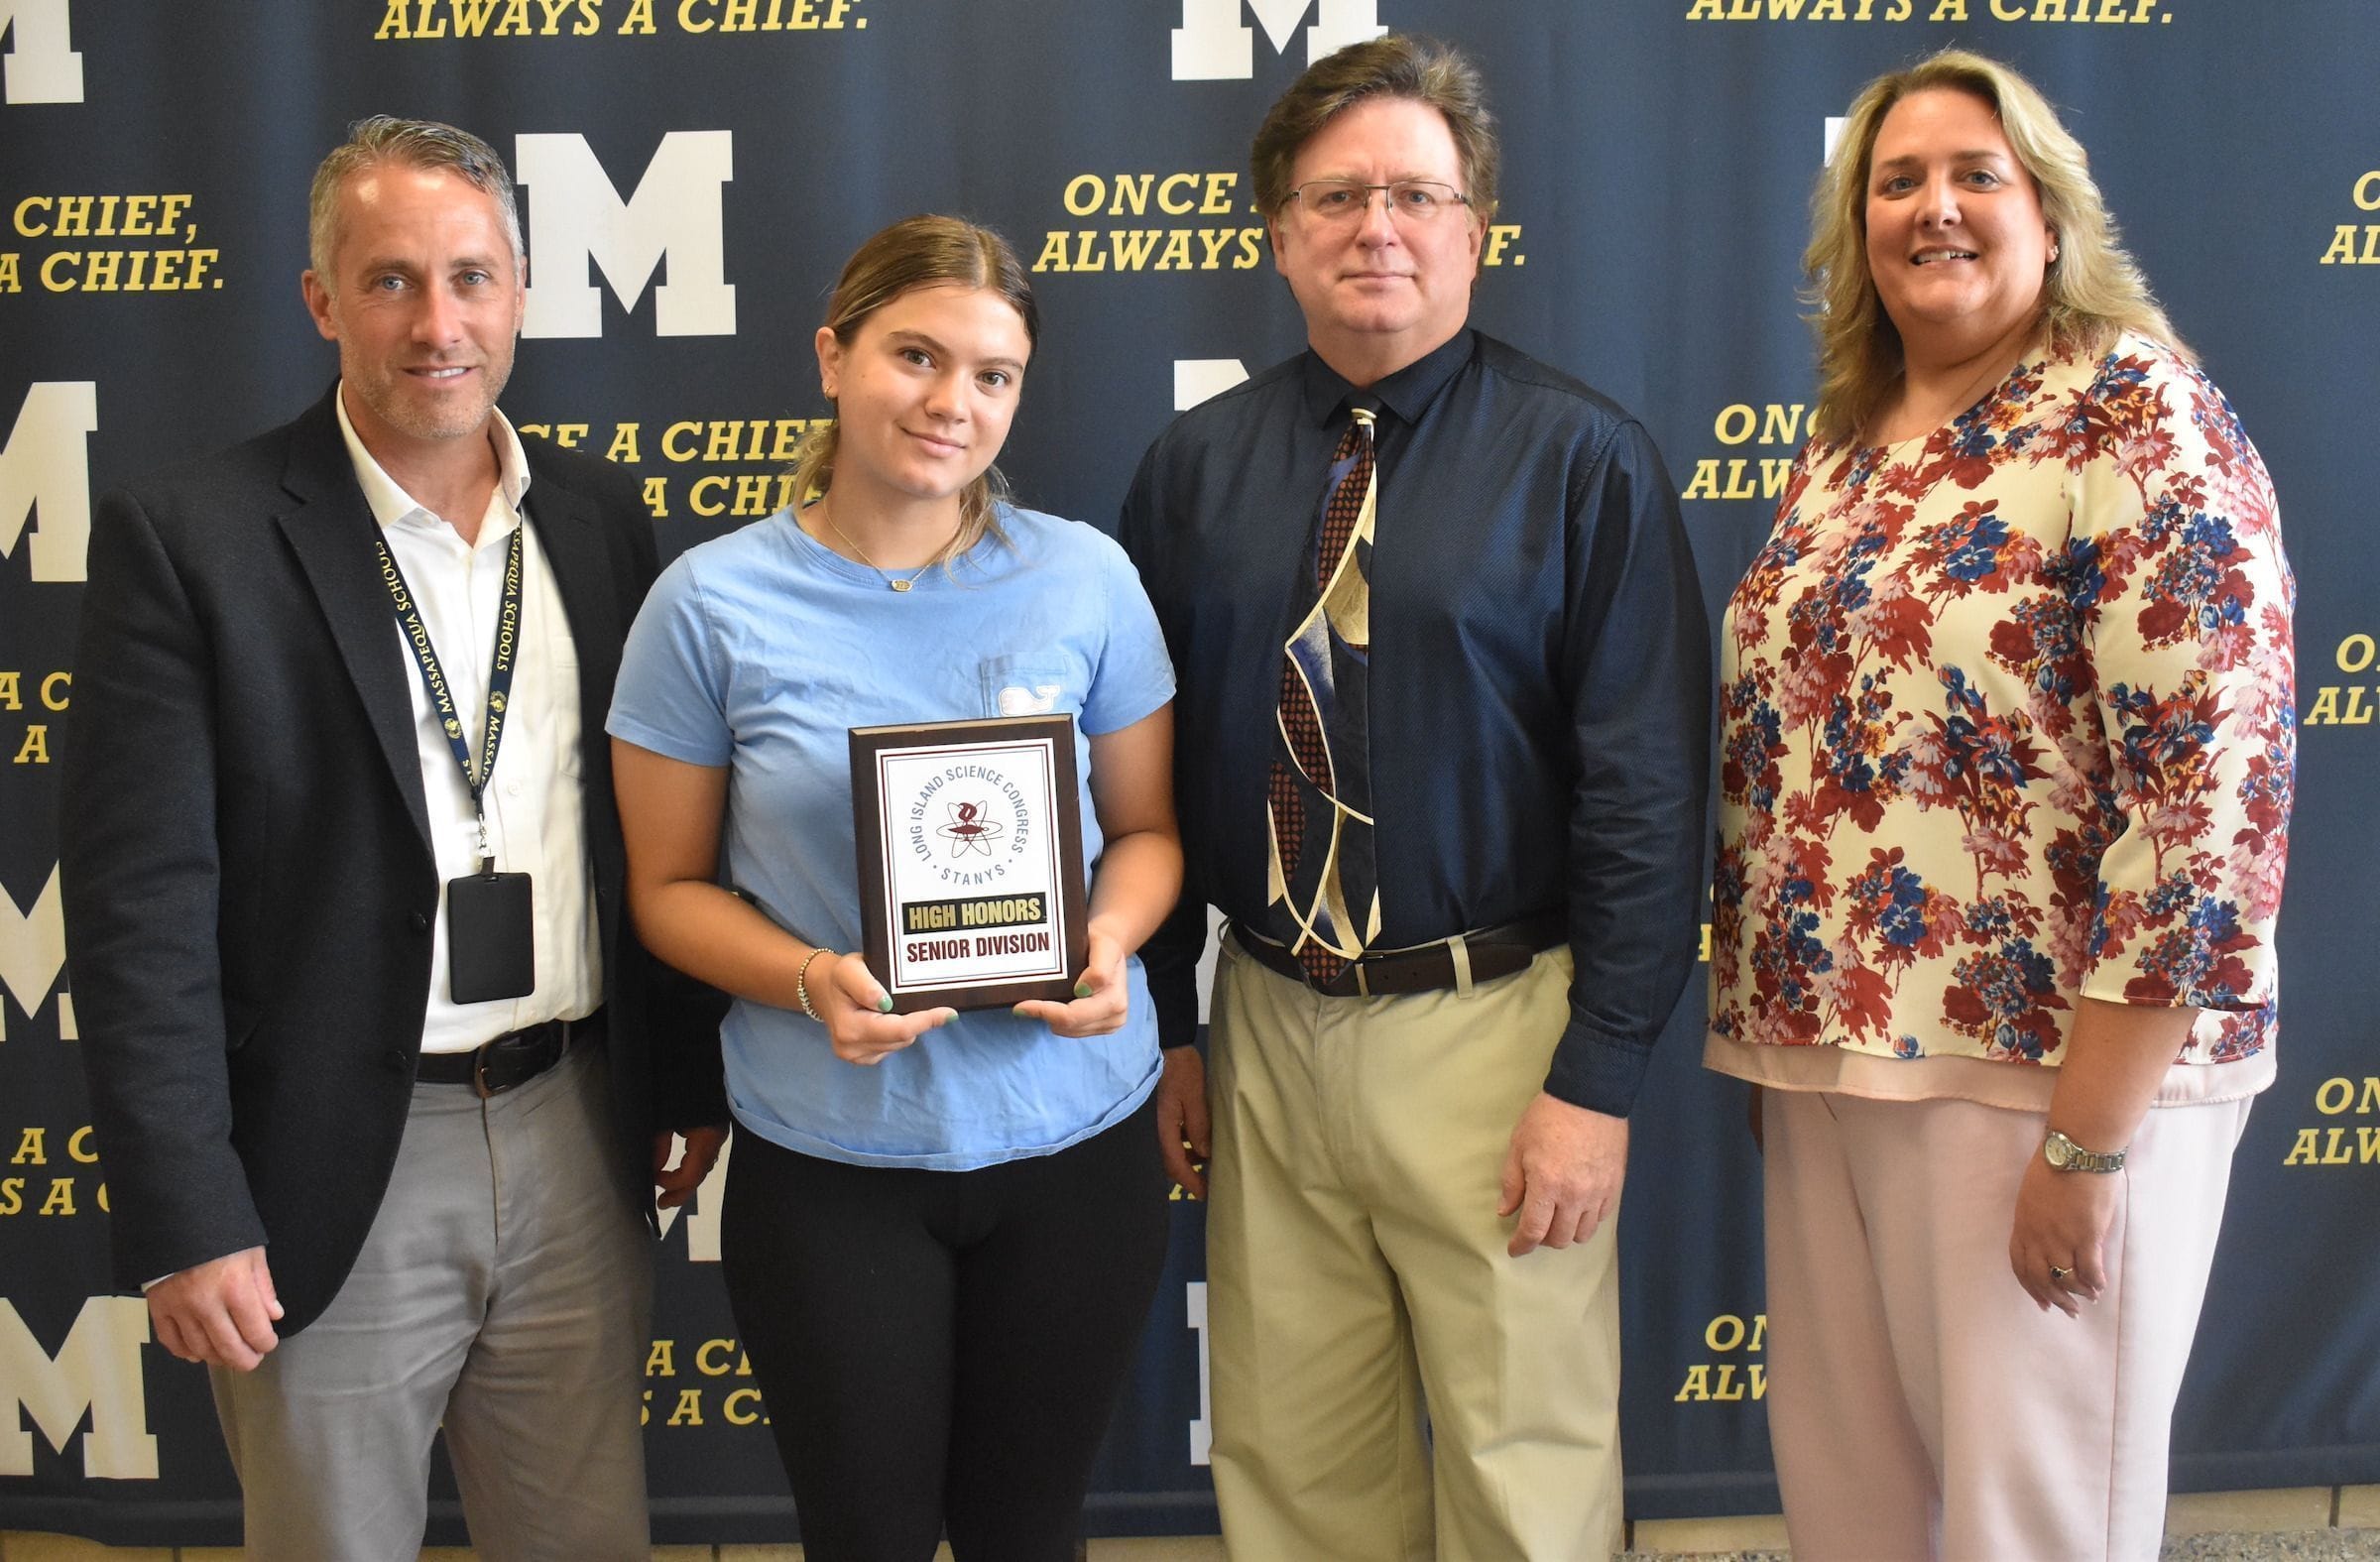 Massapequa Science Student Honored For Brain Tumor Research